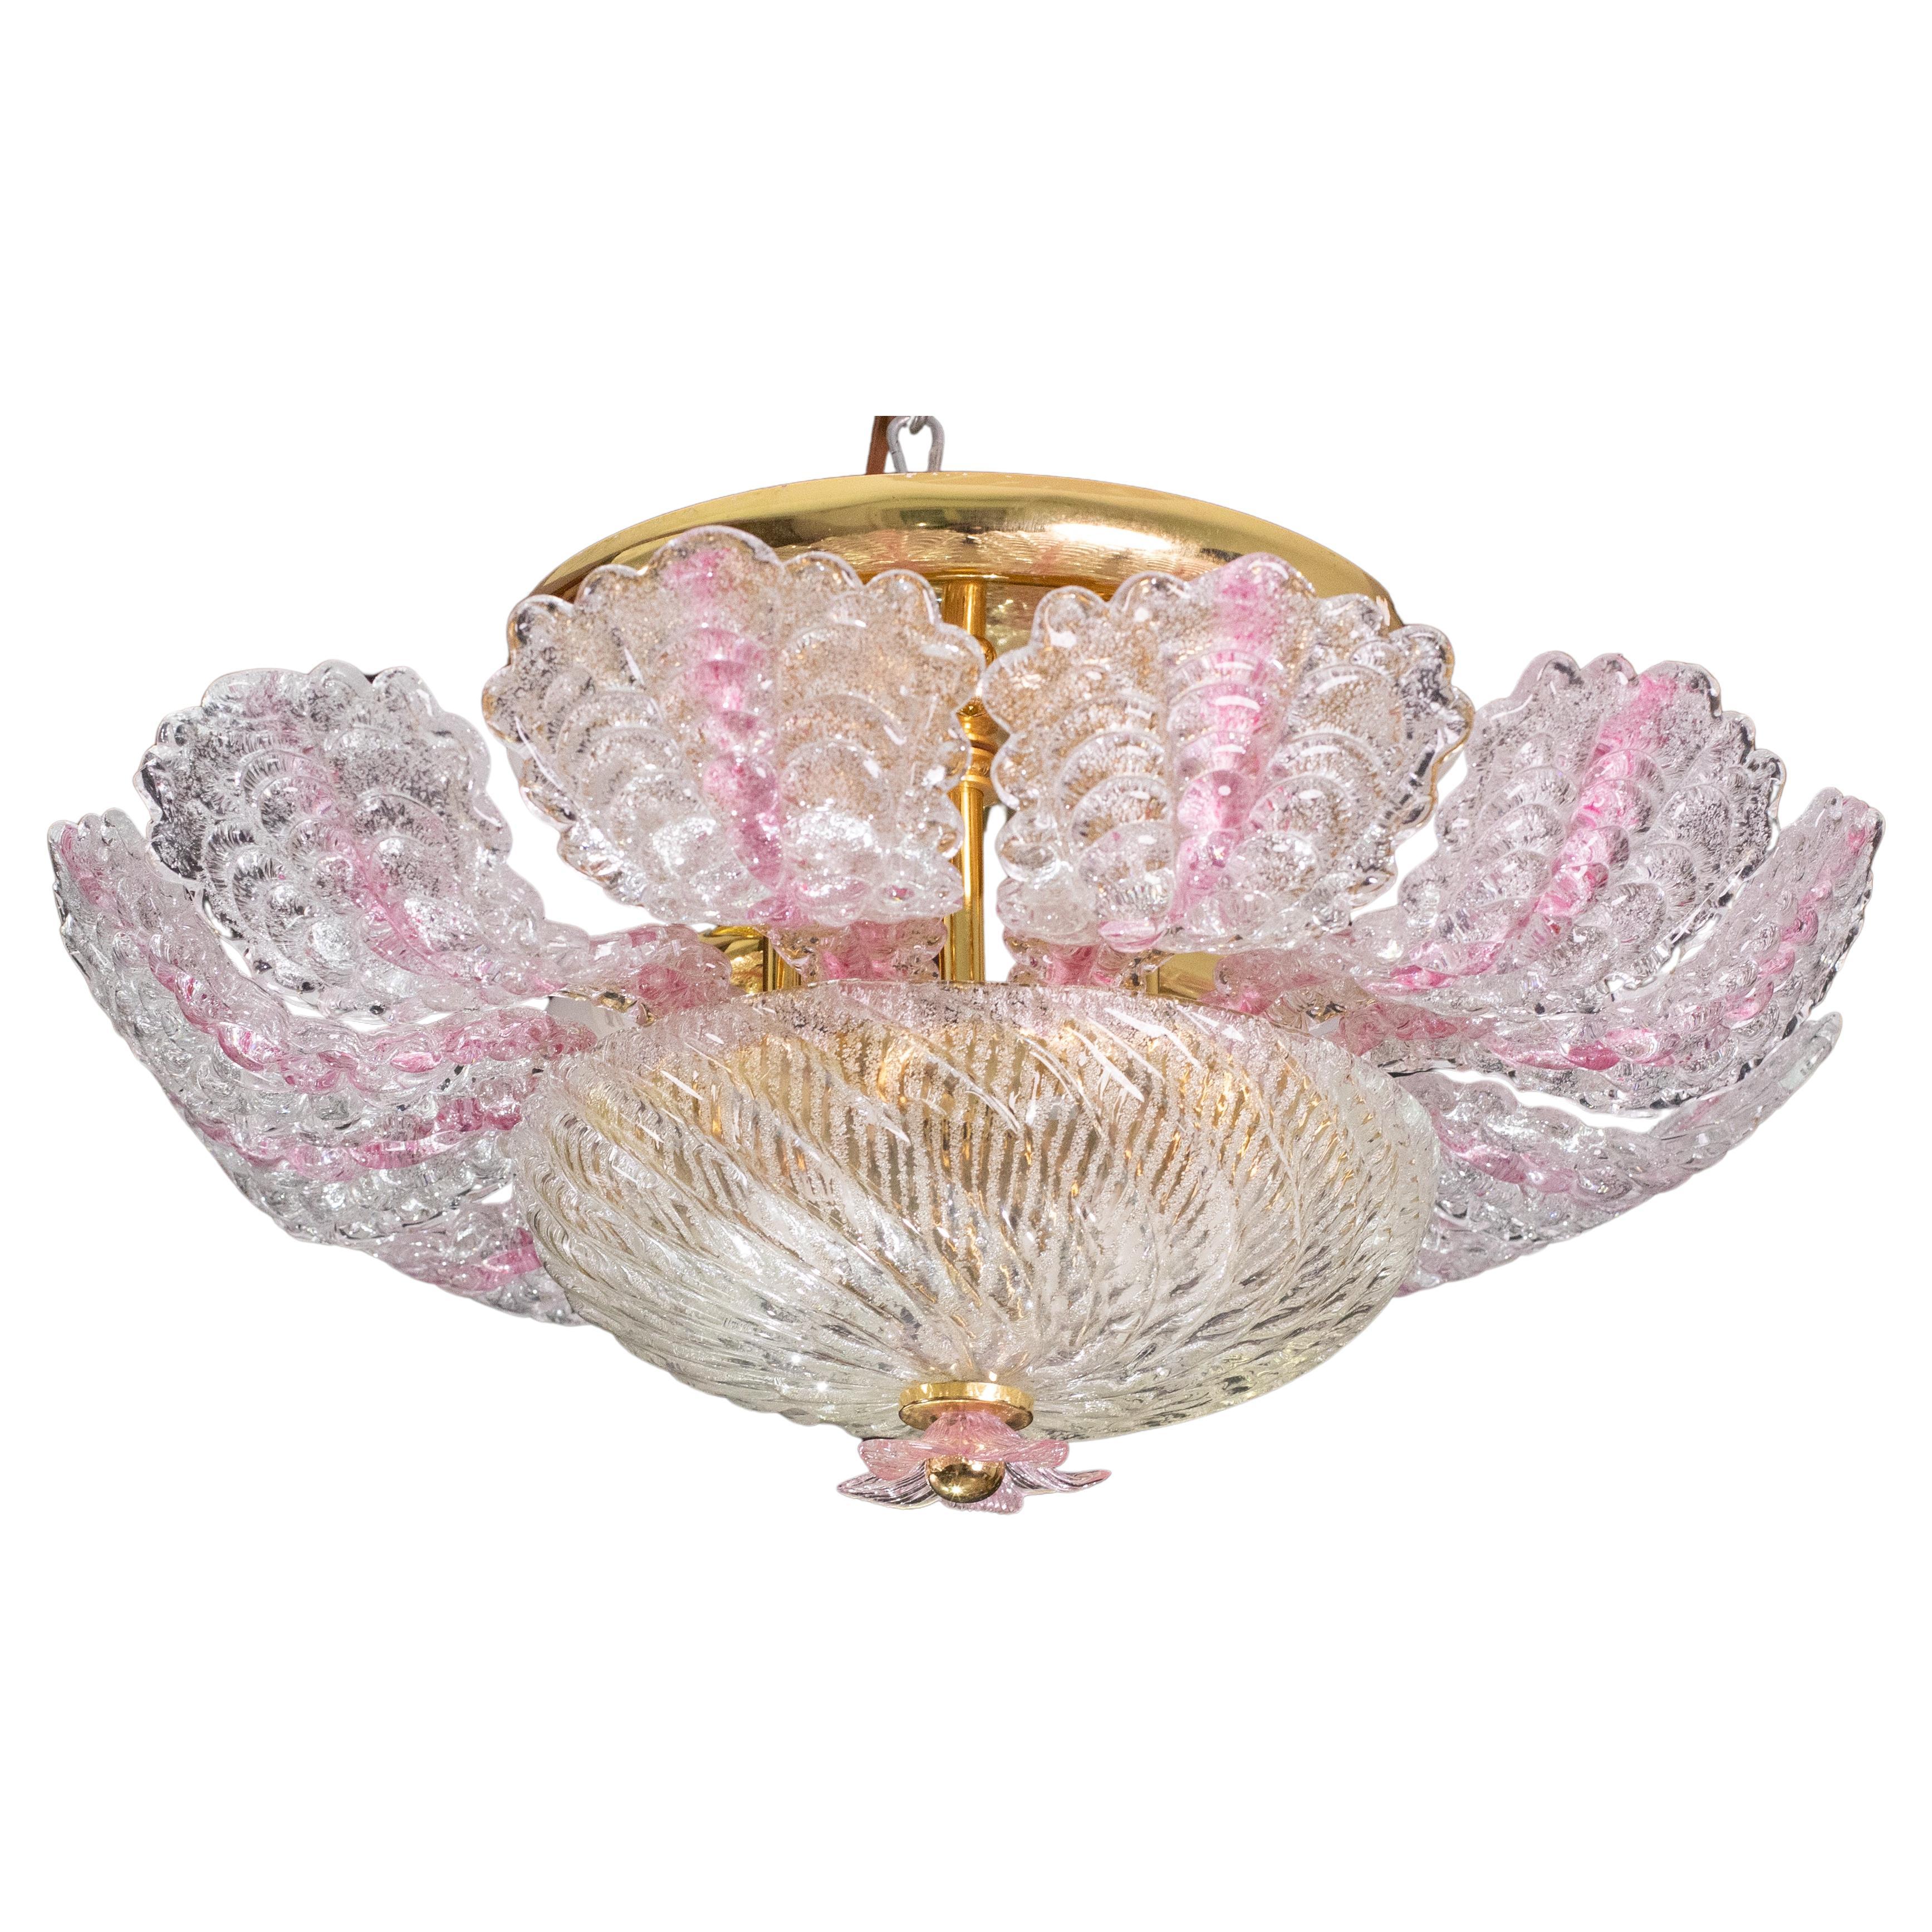 Charming Pink Murano Glass Leave Ceiling Light or Chandelier, 1970s For Sale